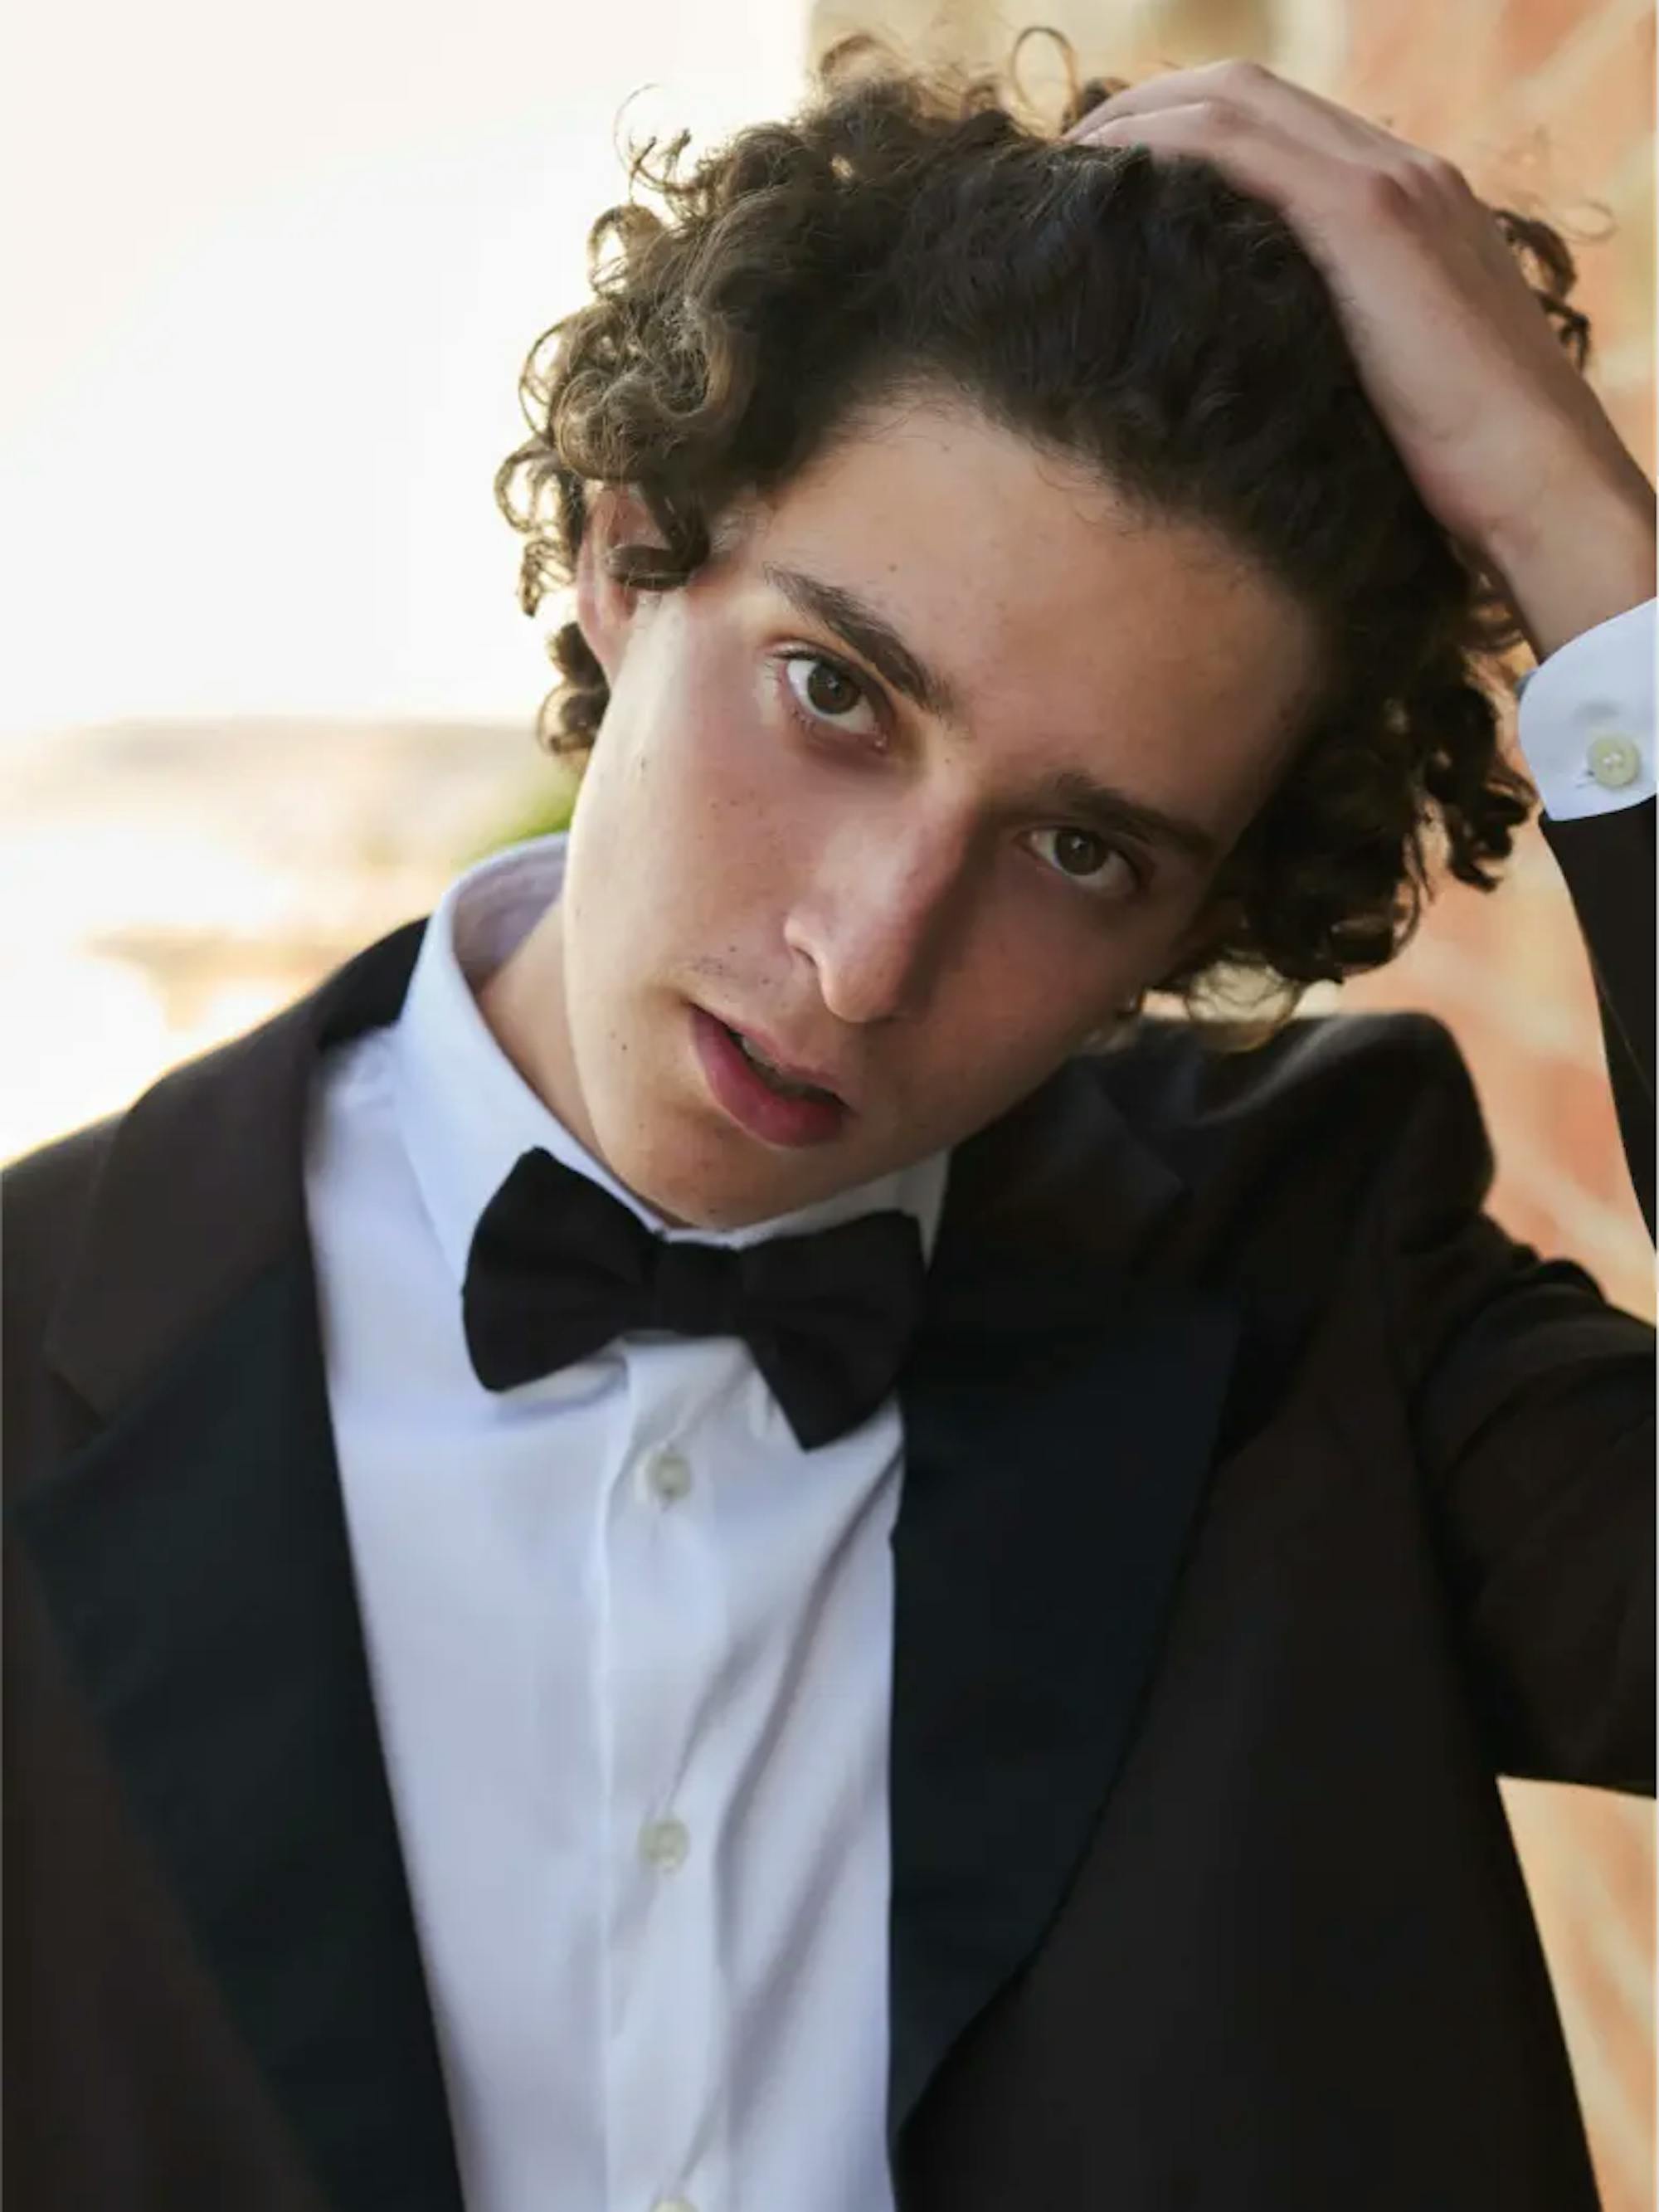 Filippo Scotti wears a tux and bowtie as he brushes his curls off his face in this close up shot.